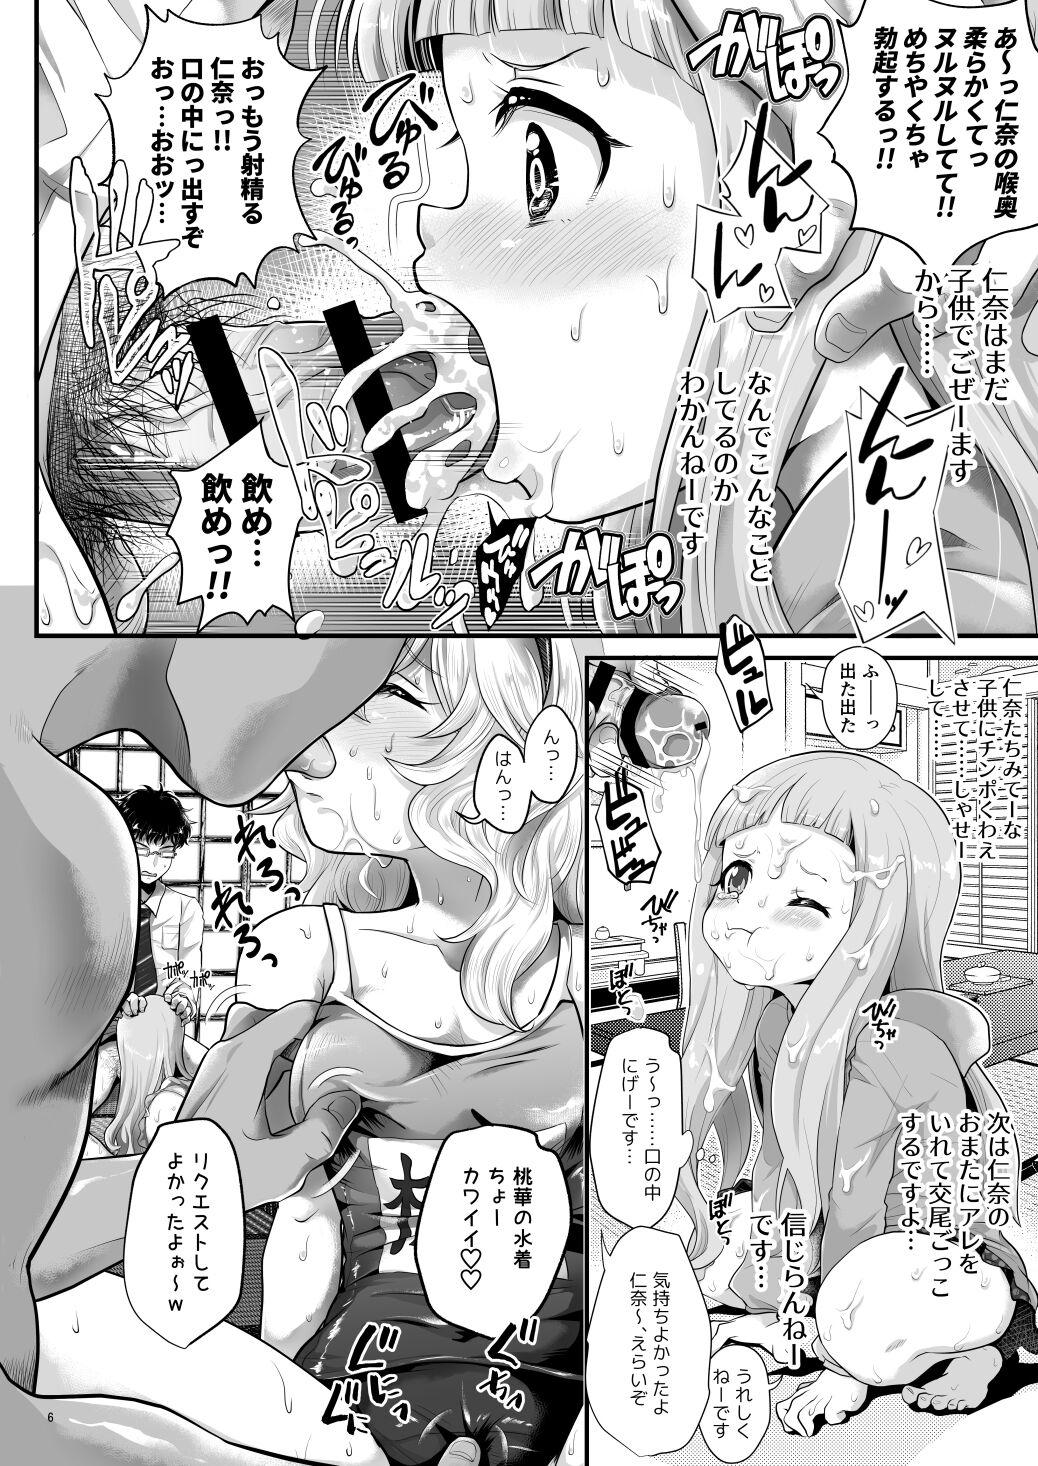 Teacher THE chiDOLM@STER Cinderella Little Girls - The idolmaster Amature Sex - Page 5